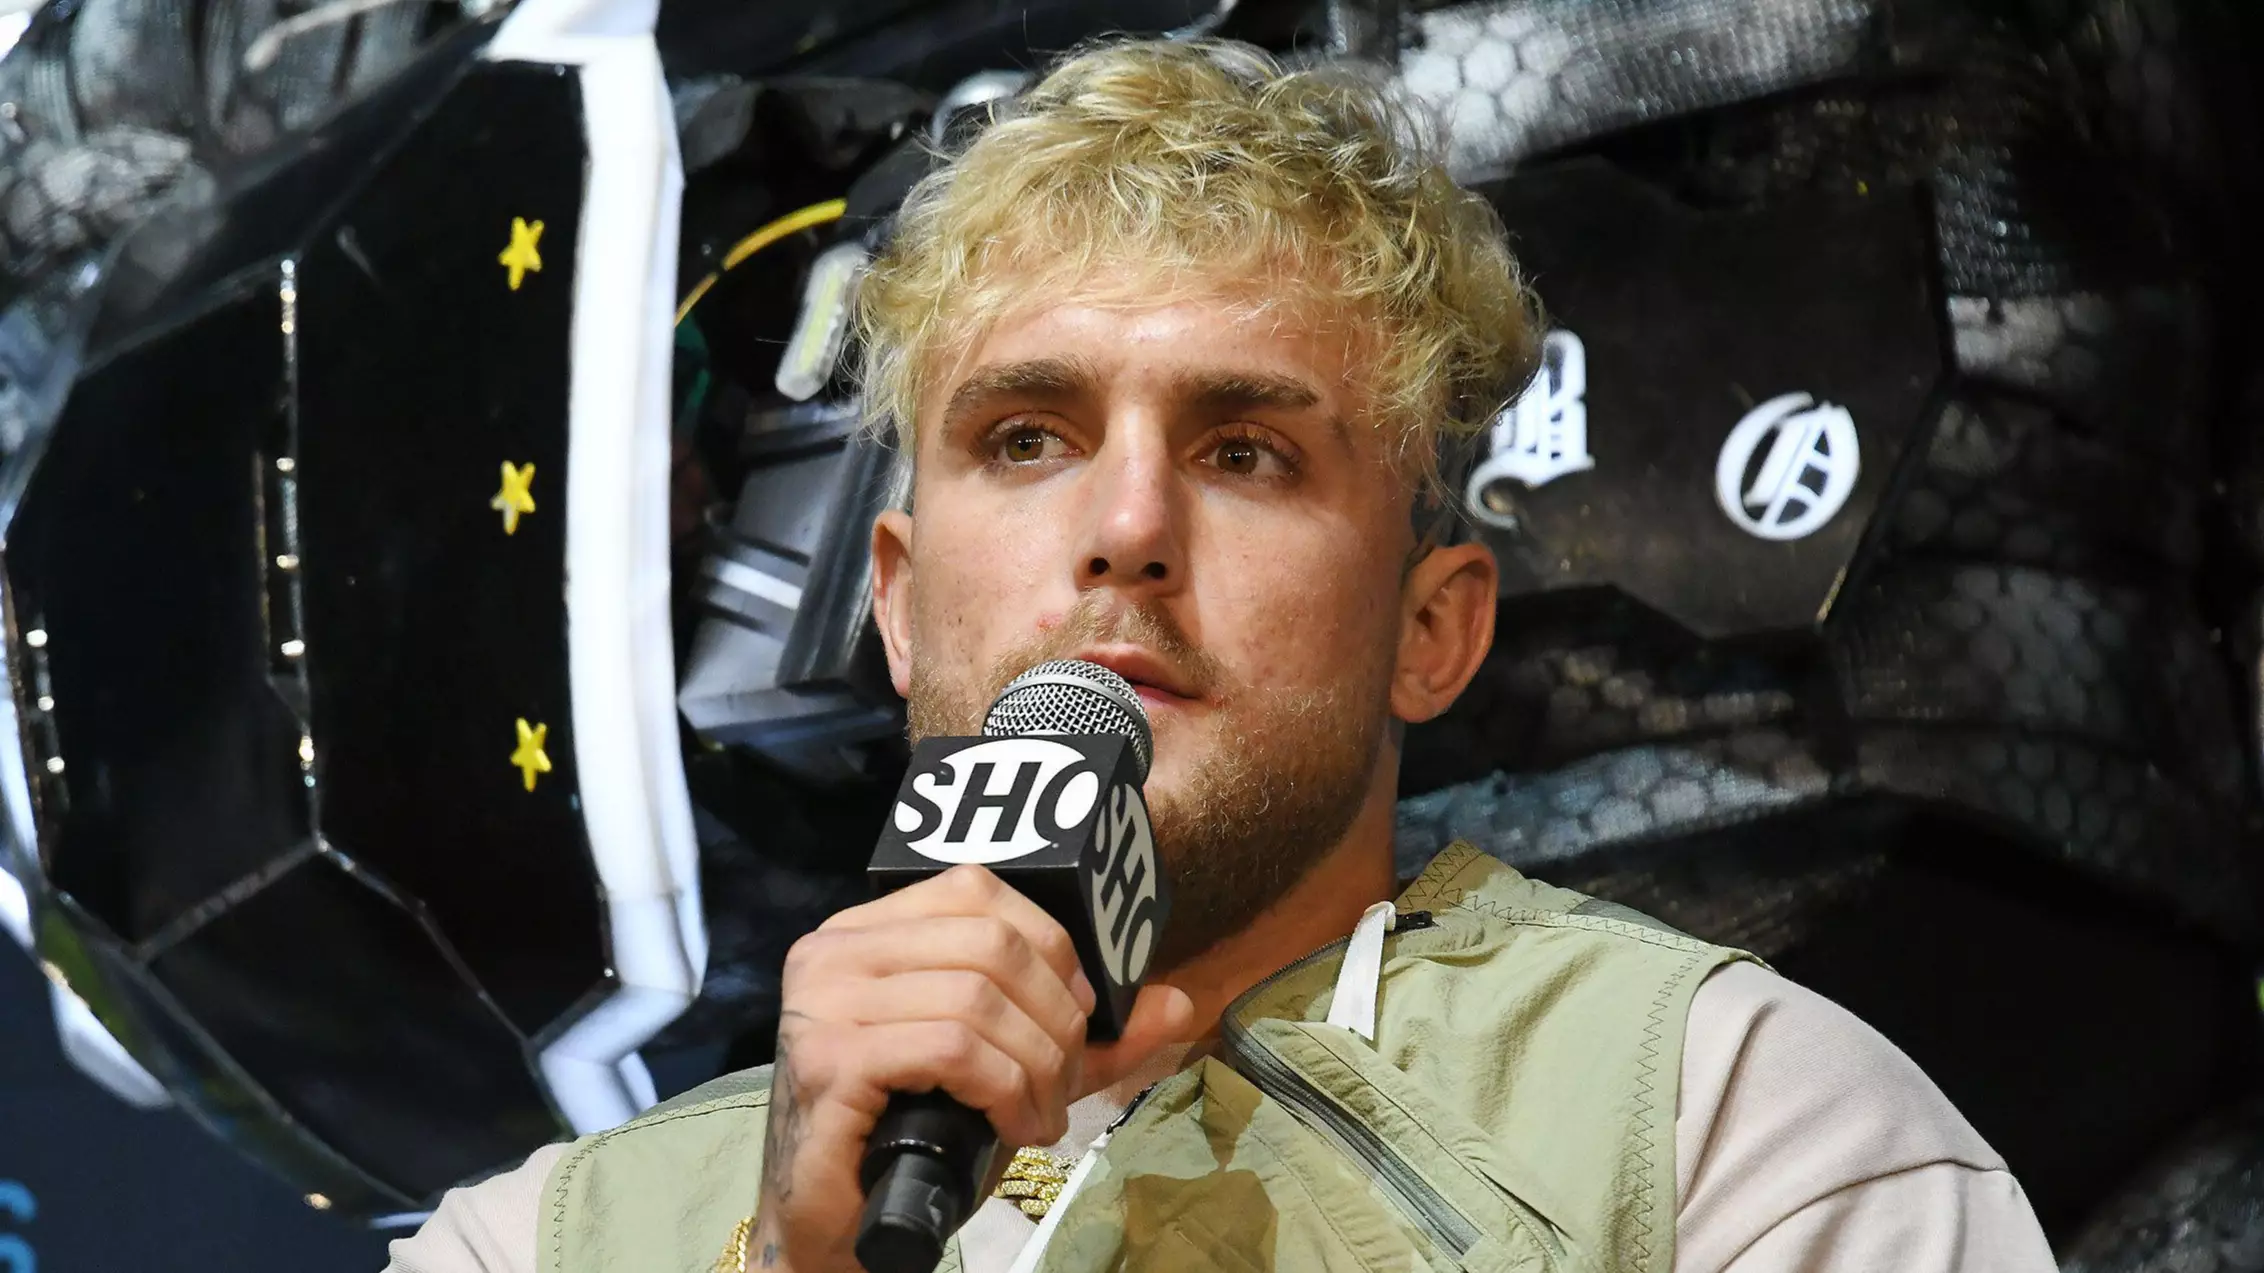 Jake Paul Has Started To Experience Symptoms Of Long-Term Brain Damage From Boxing